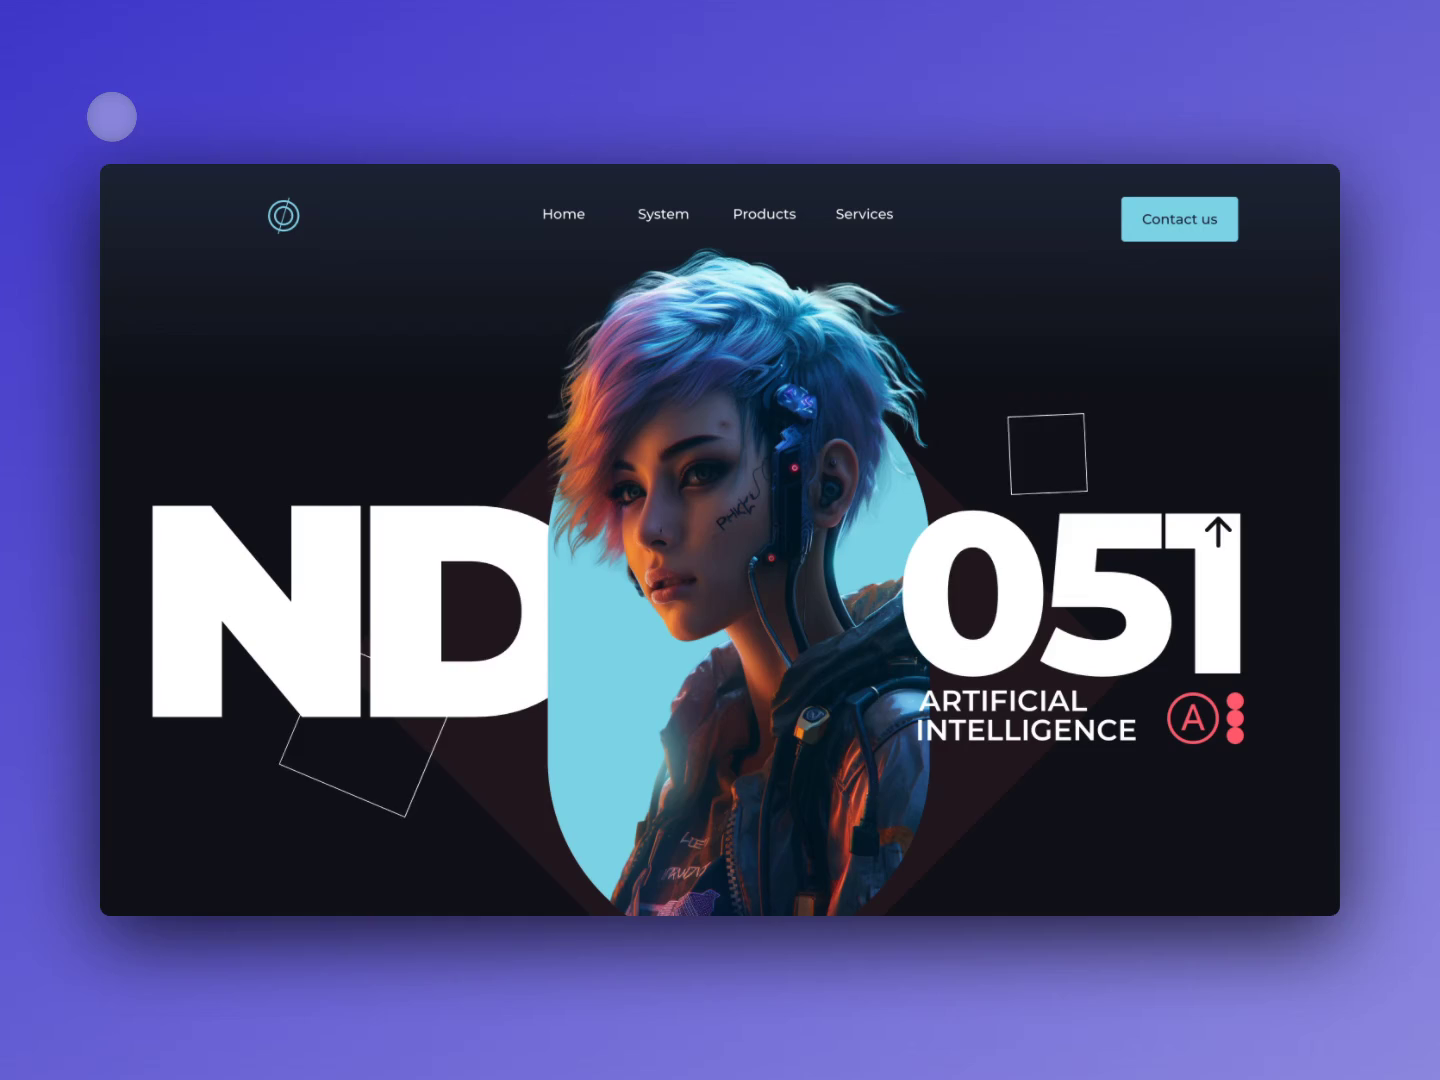 ND-051 - Design Exploration by Frederik Røssell on Dribbble